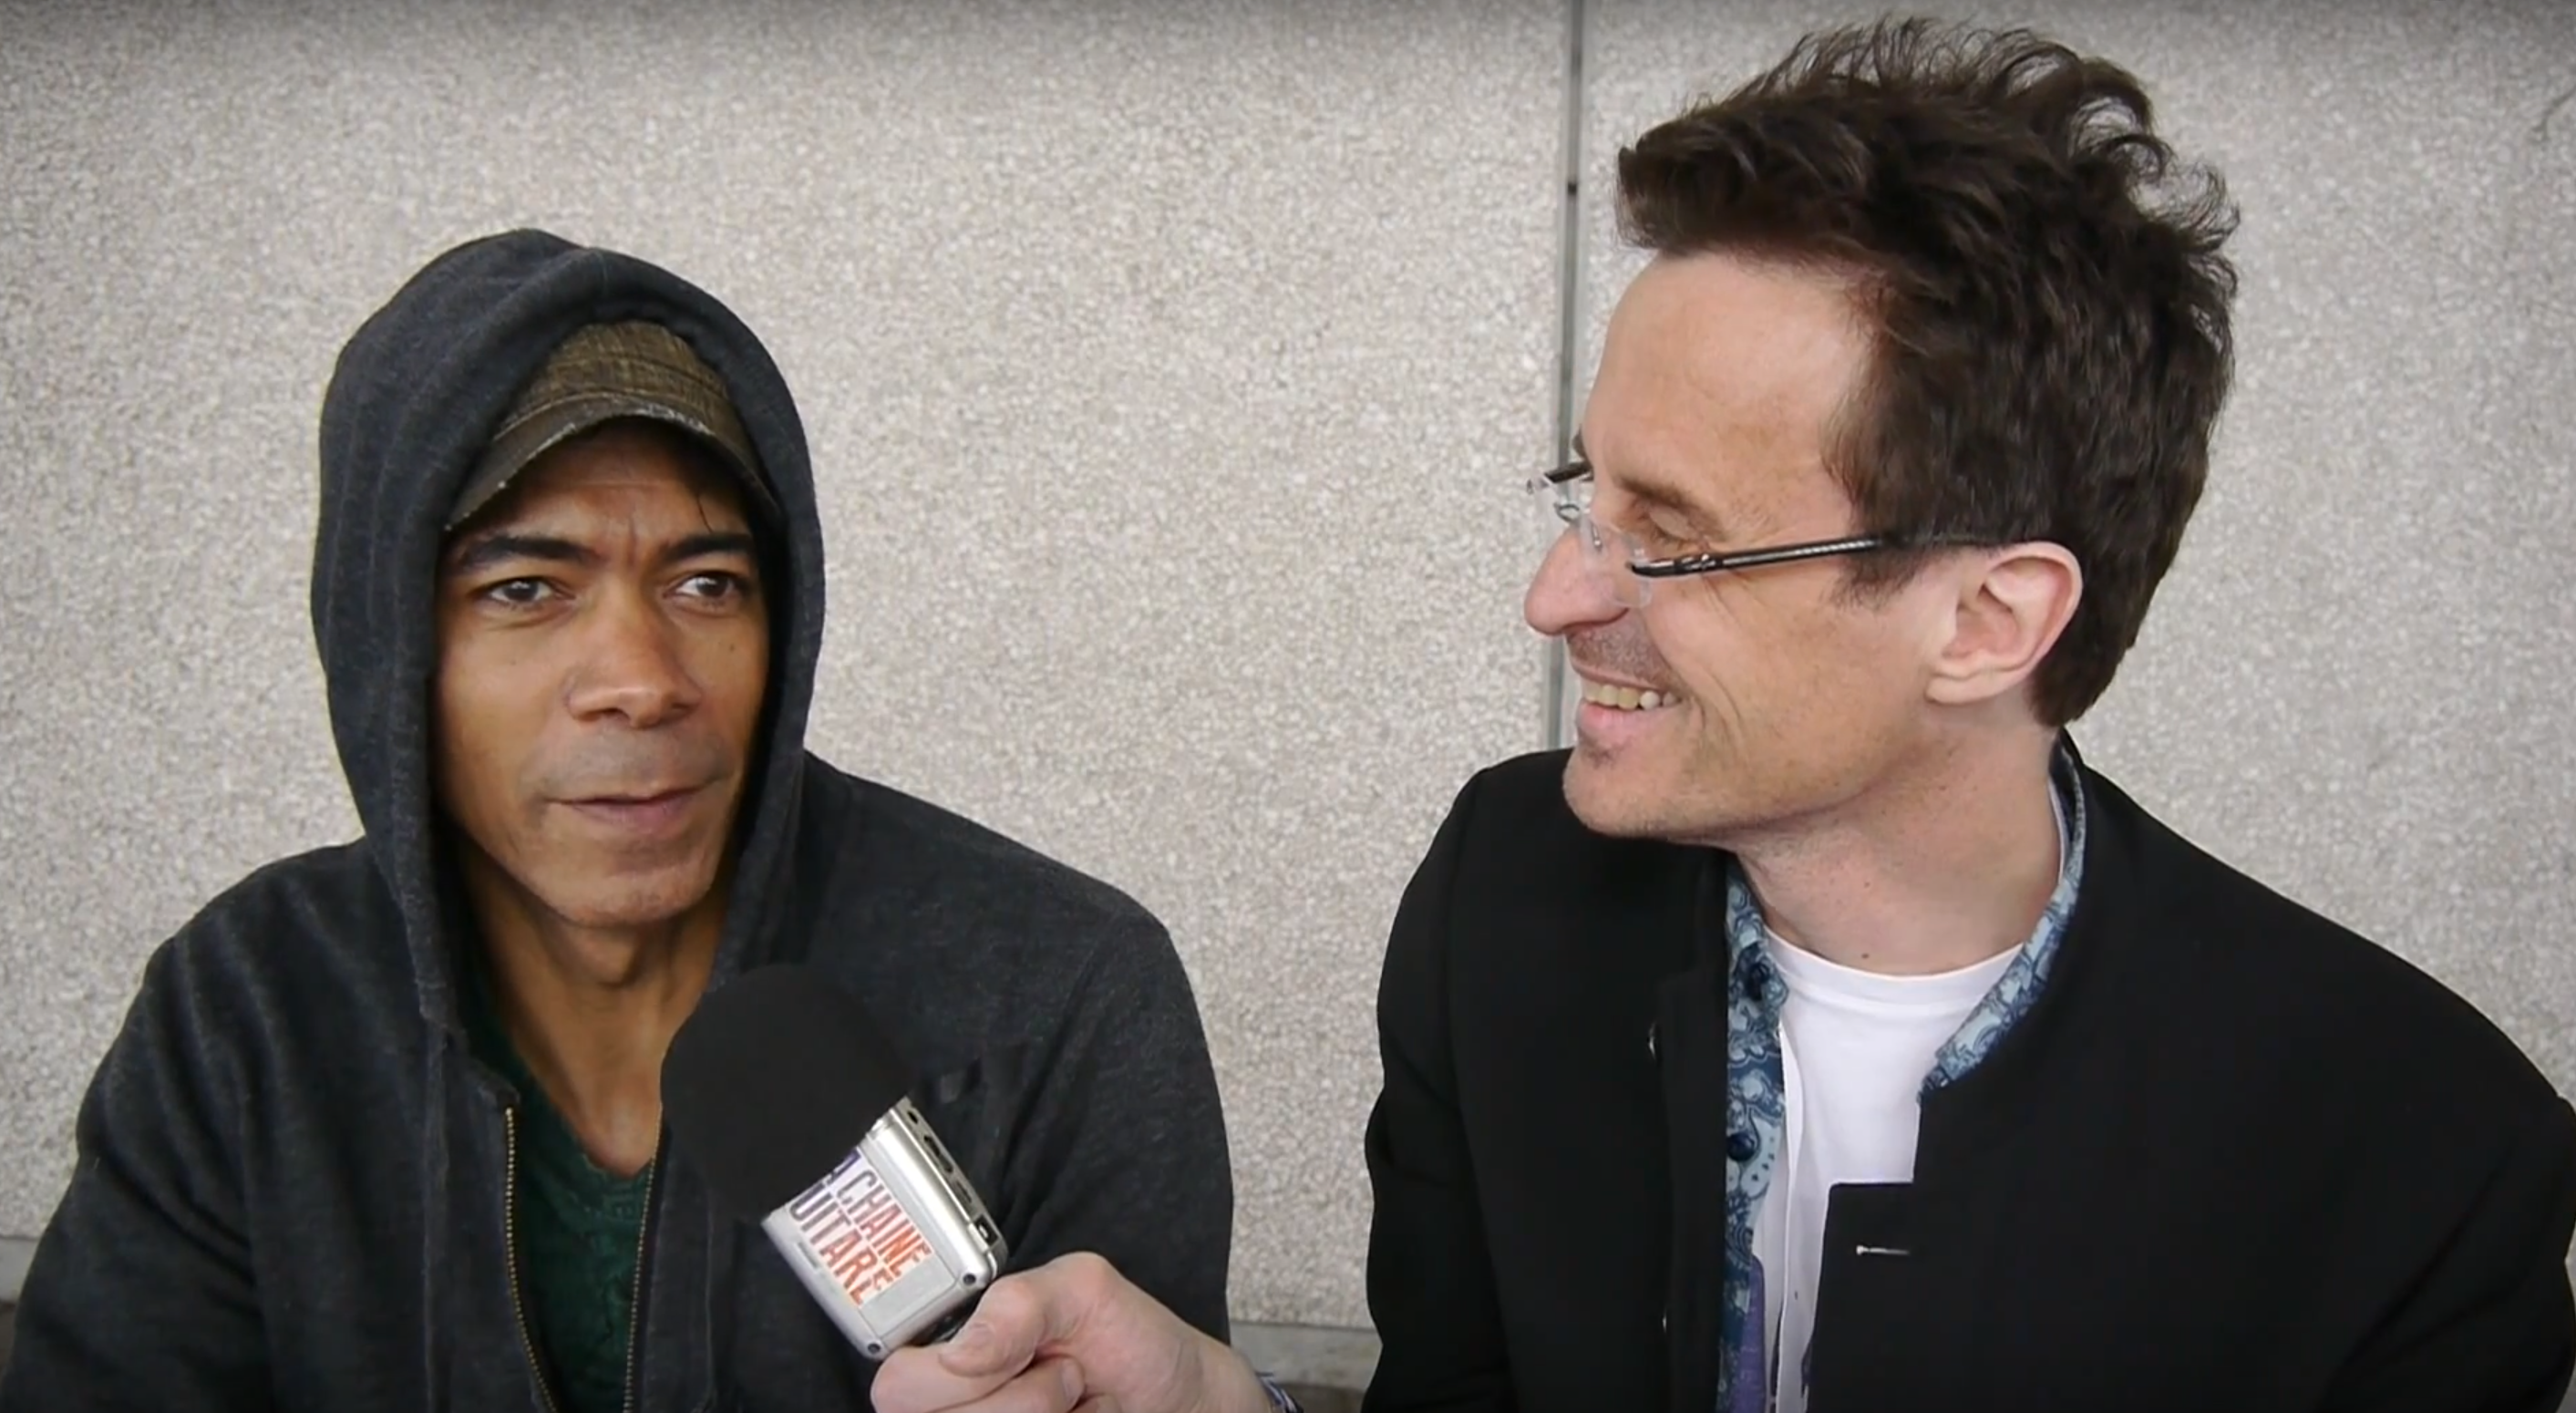 Greg Howe interview at the 2015 Musikmesse